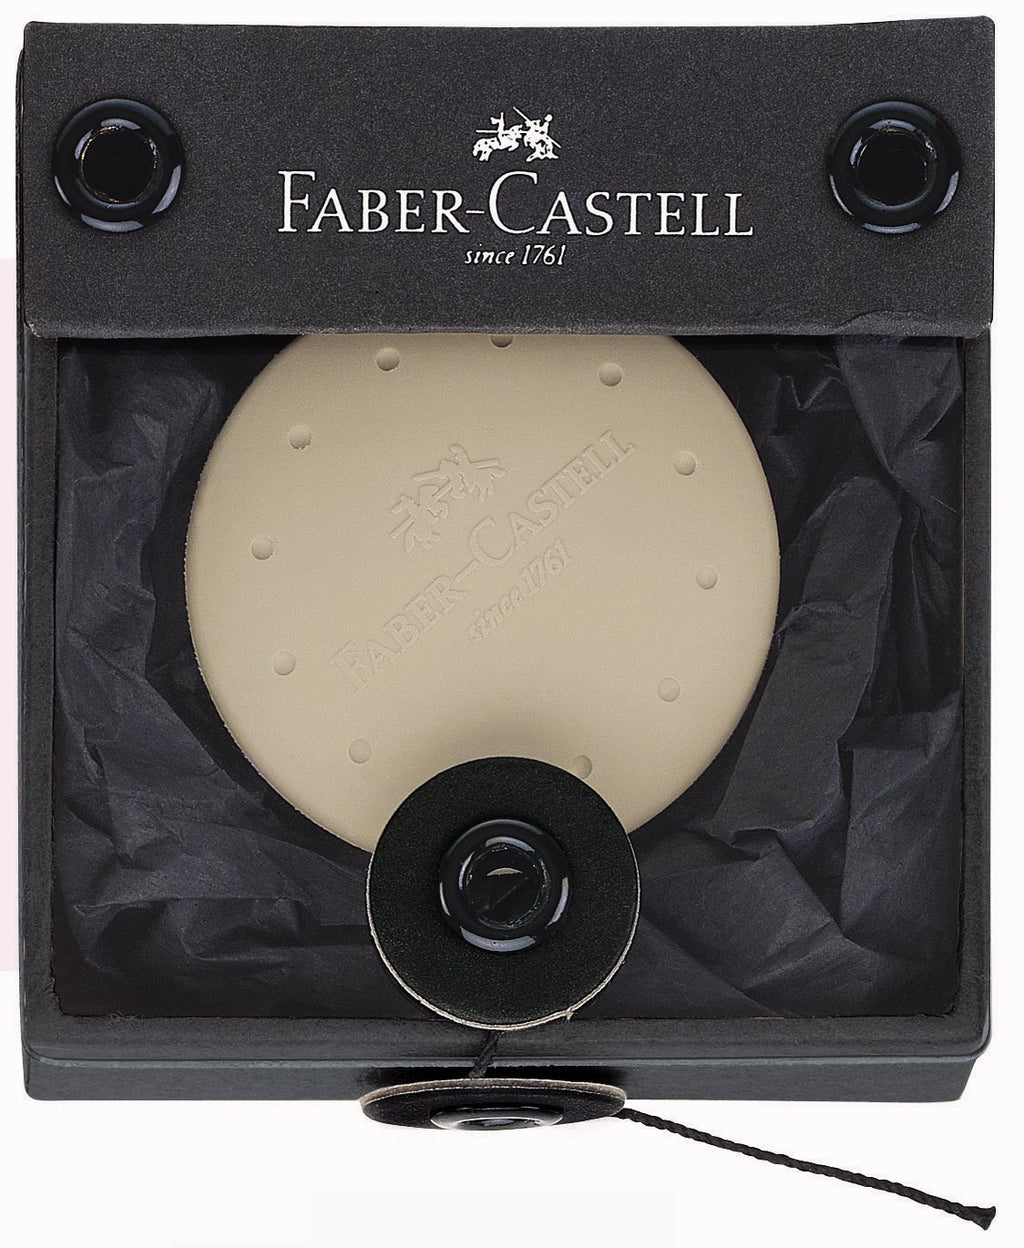 Faber-Castell UFO Eraser in Gift Box - Faber-Castell -  L.S.F. Group of Companies 